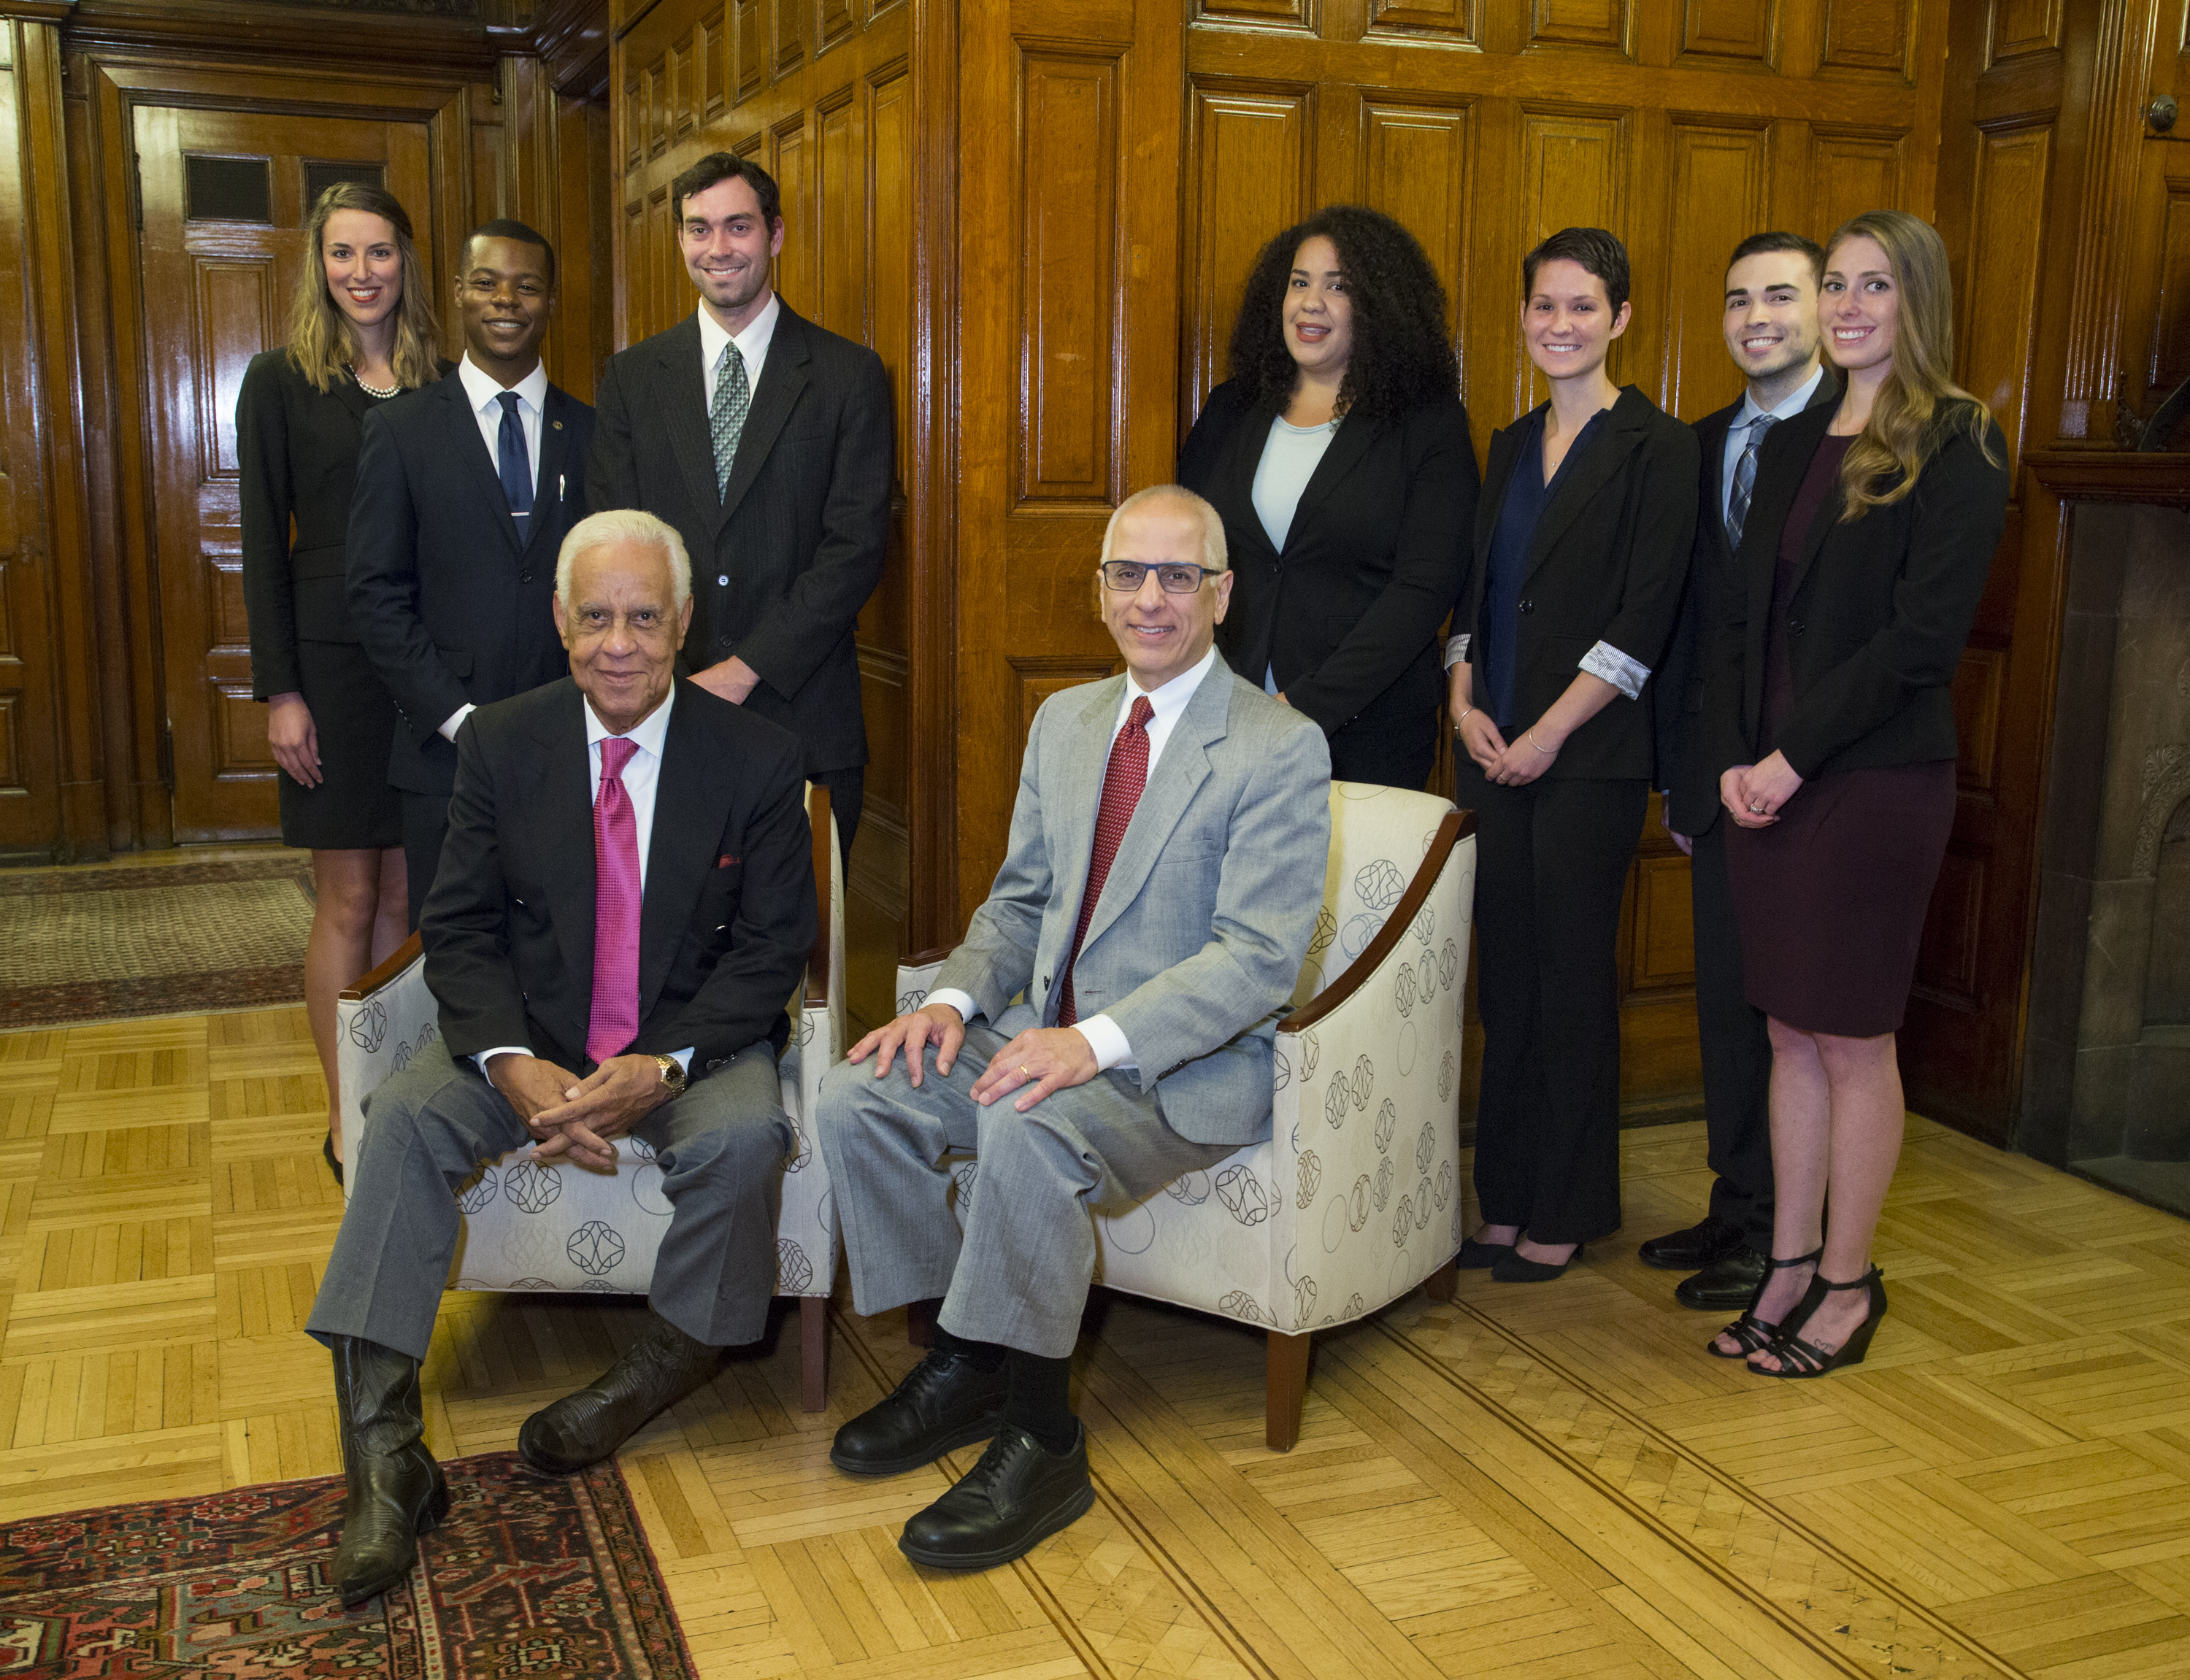 Wilder Graduate Scholars’ Fellows gather with Governor L. Douglas Wilder (seated, left) and Interim Dean, John Accordino, Ph.D., (seated,right) at Office of the Provost on Sept. 8. Fellows (standing, from left to right): Lara Mclellan, Ibrahim Keita, Joseph Costello, Lashelle Johnson, Alexandra Stewart, Nathan Manning and Theresa Varnier.